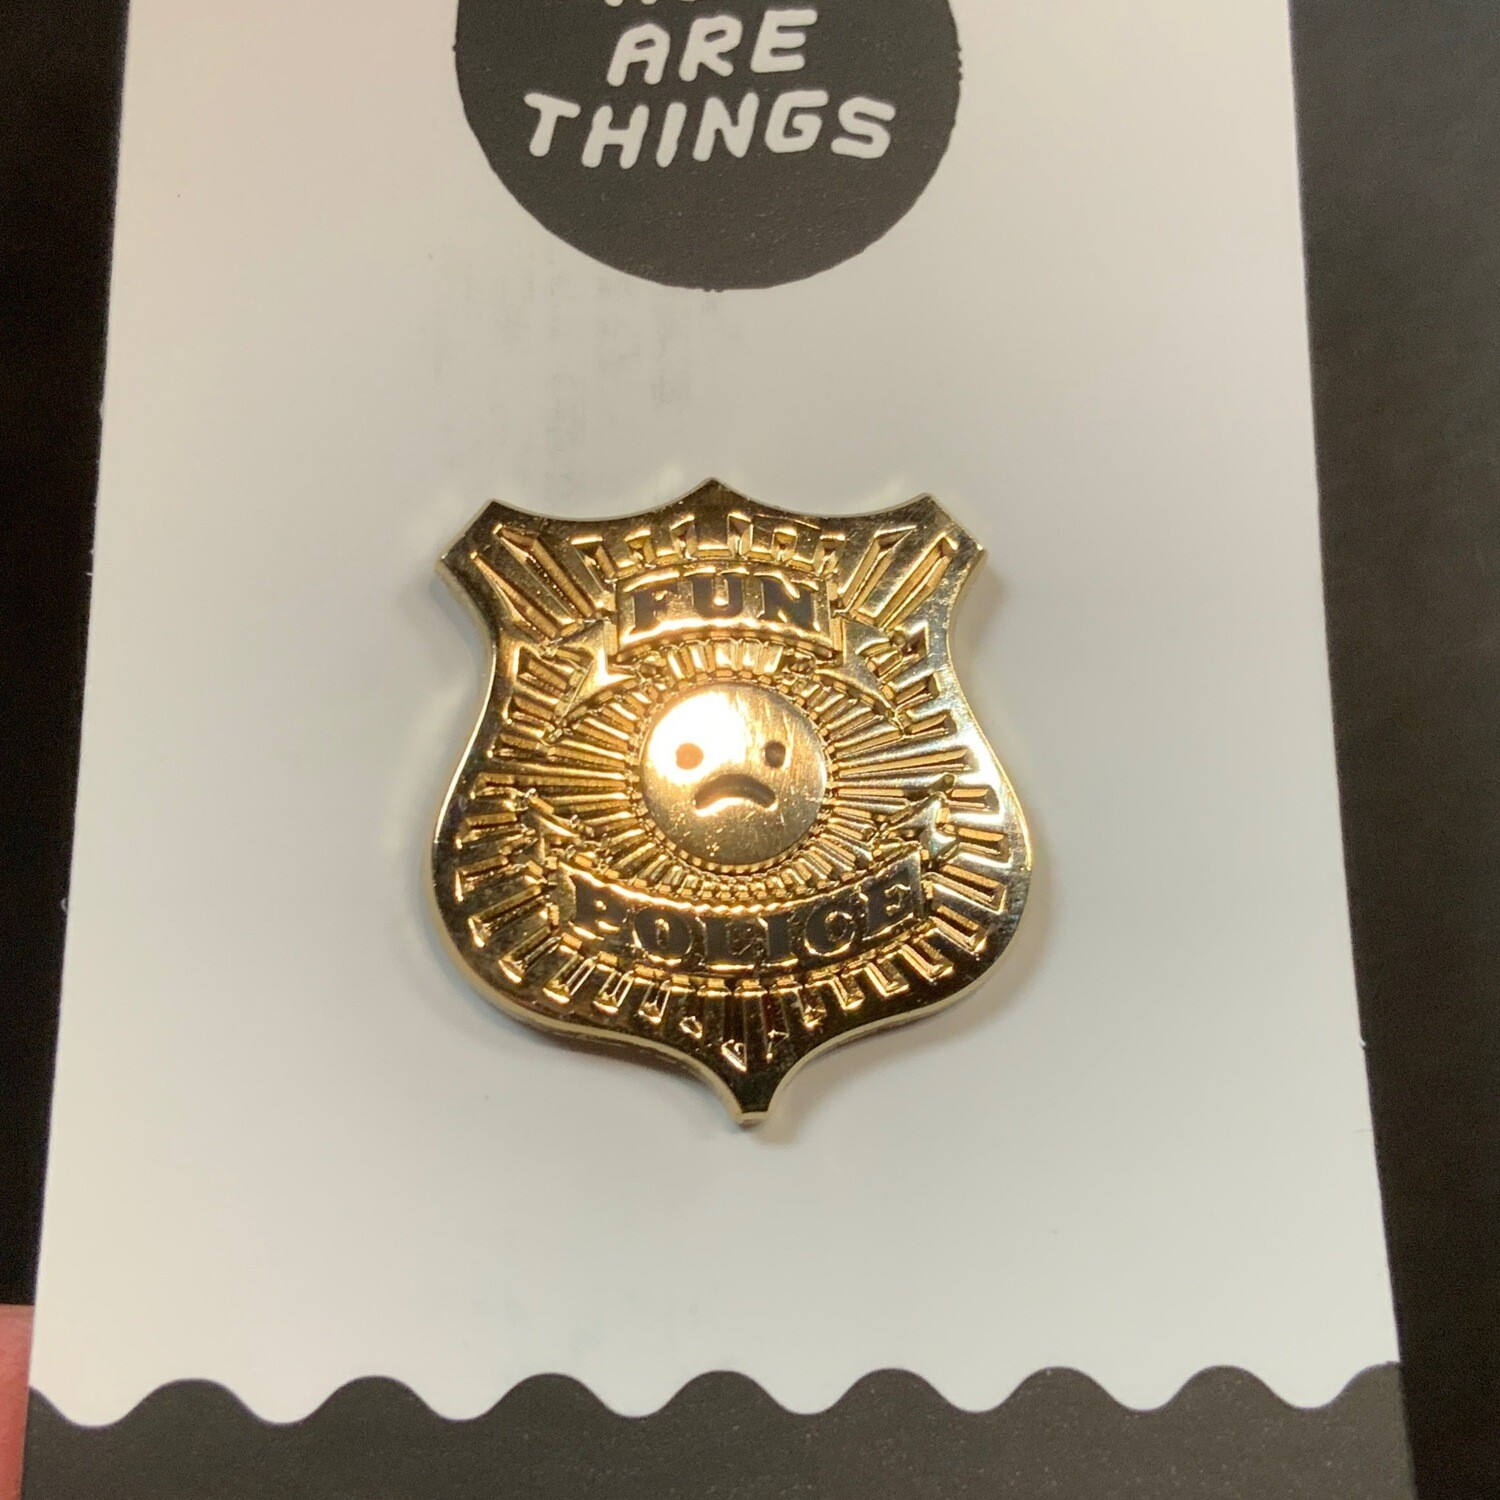 Fun Police - Enamel Pin from These Are Things